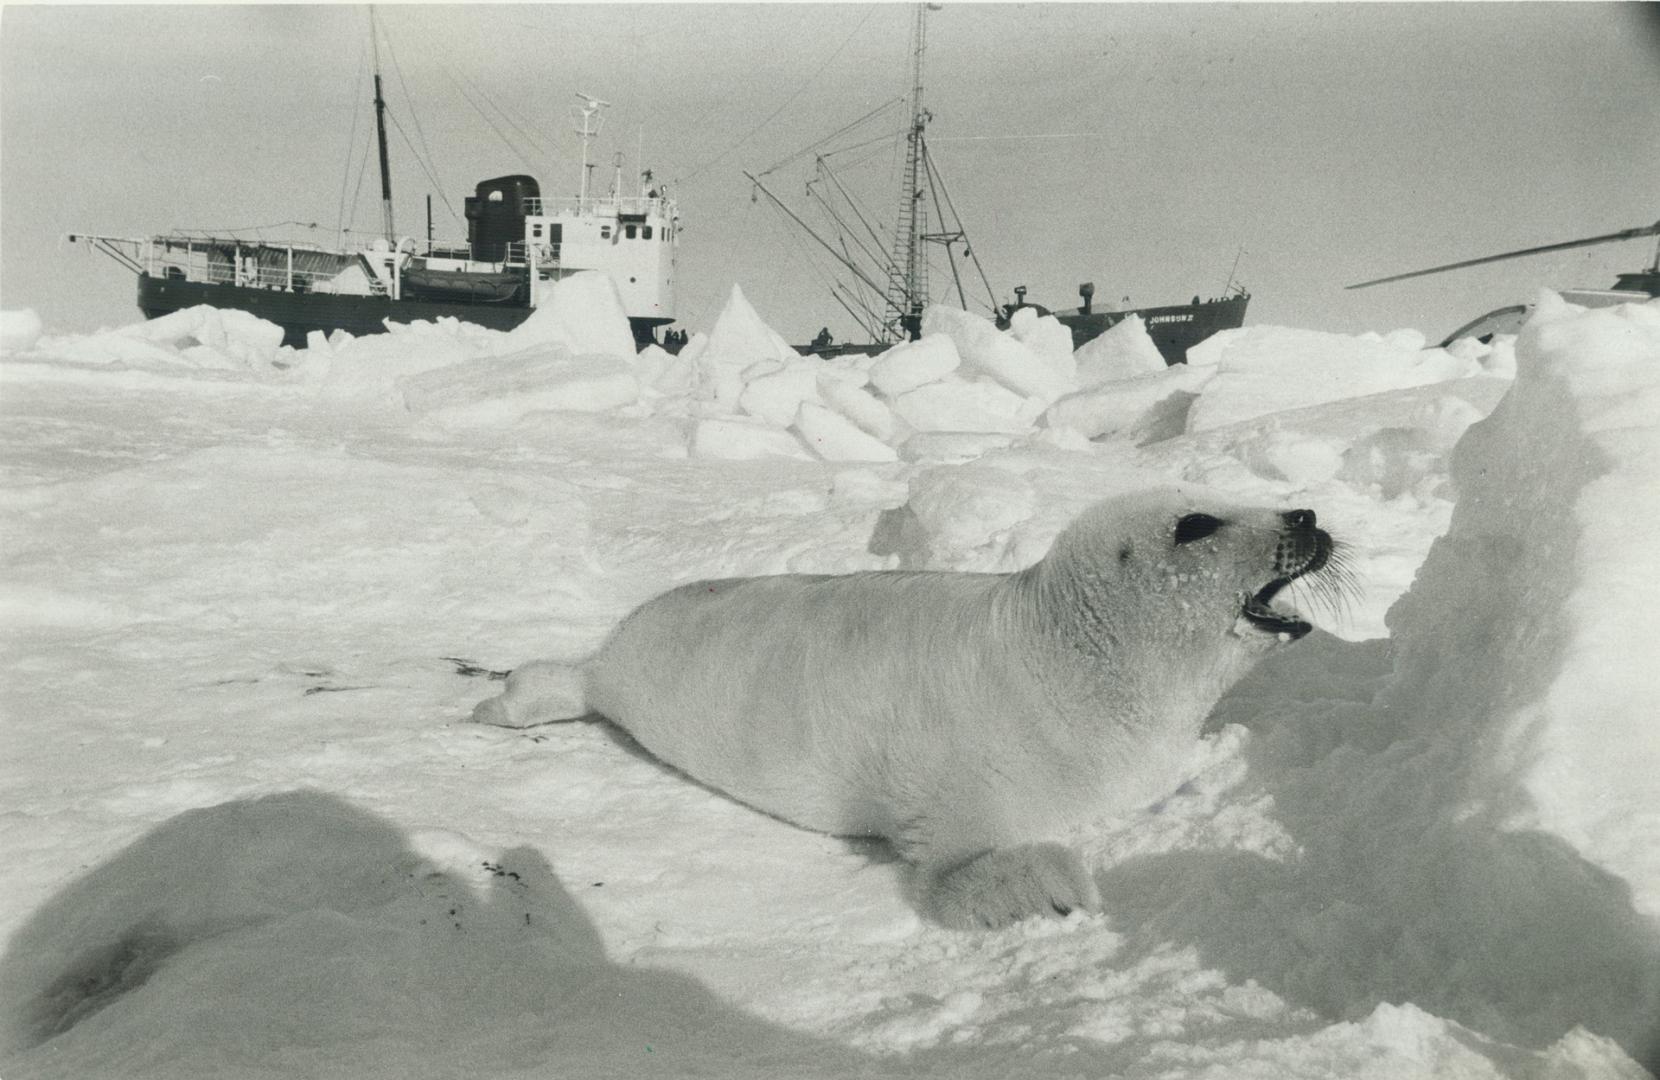 Annual controversy: Since few natural predators remain in sufficient numbers to act as a check on seal populations, reader says in letter below, a halt of the seal hunt would have disastrous effects